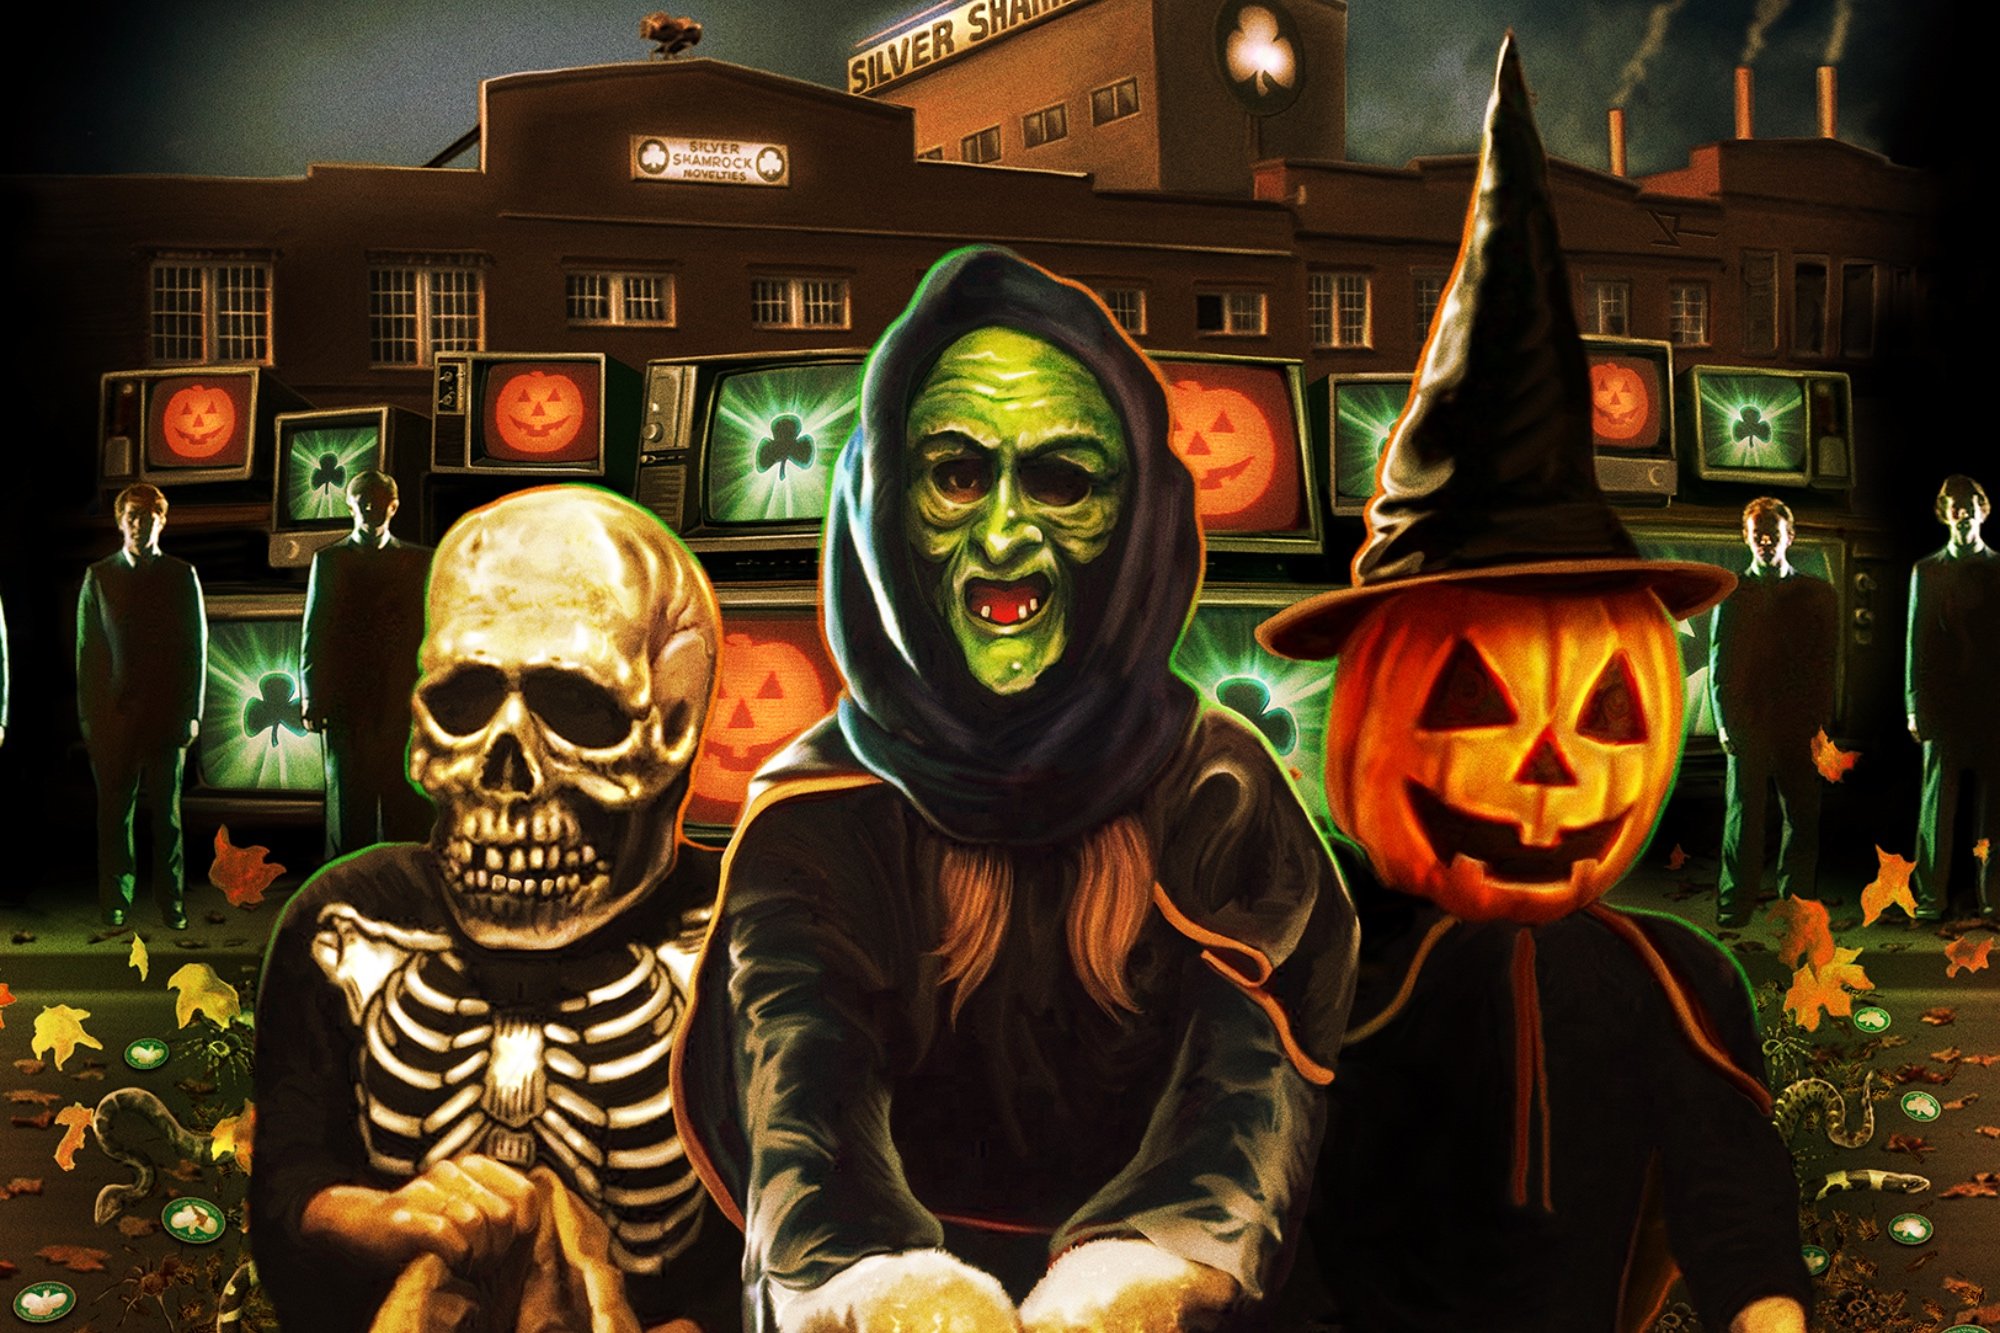 'Halloween III: Season of the Witch' Shout! Factory Blu-ray cover with three Silver Shamrock masks